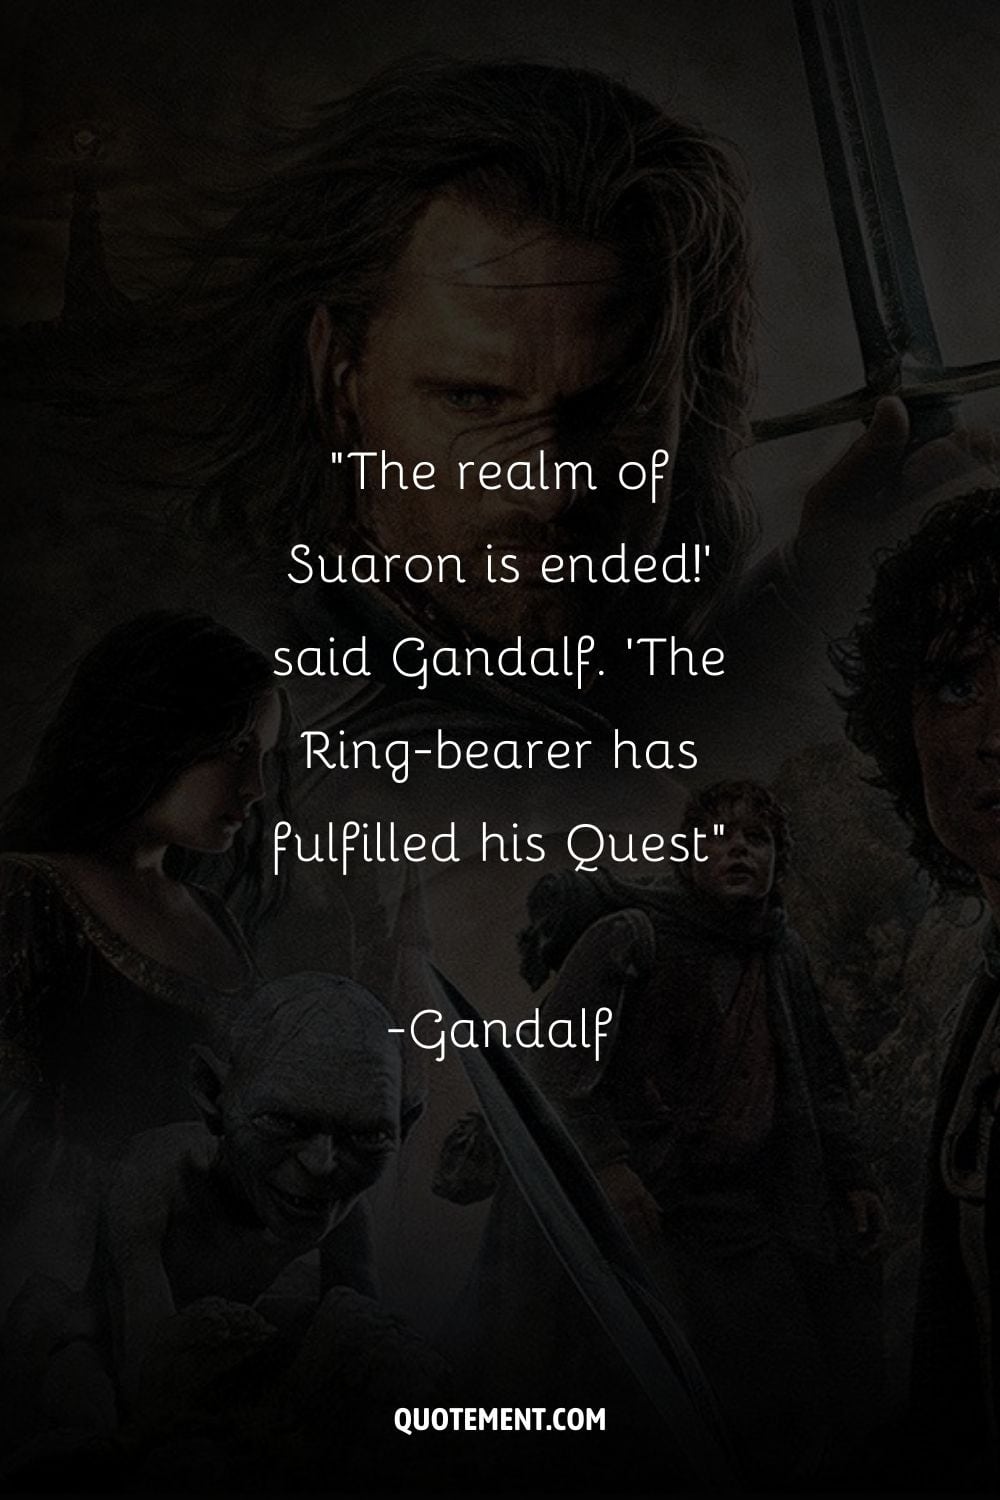 The realm of Suaron is ended!' said Gandalf. 'The Ring-bearer has fulfilled his Quest